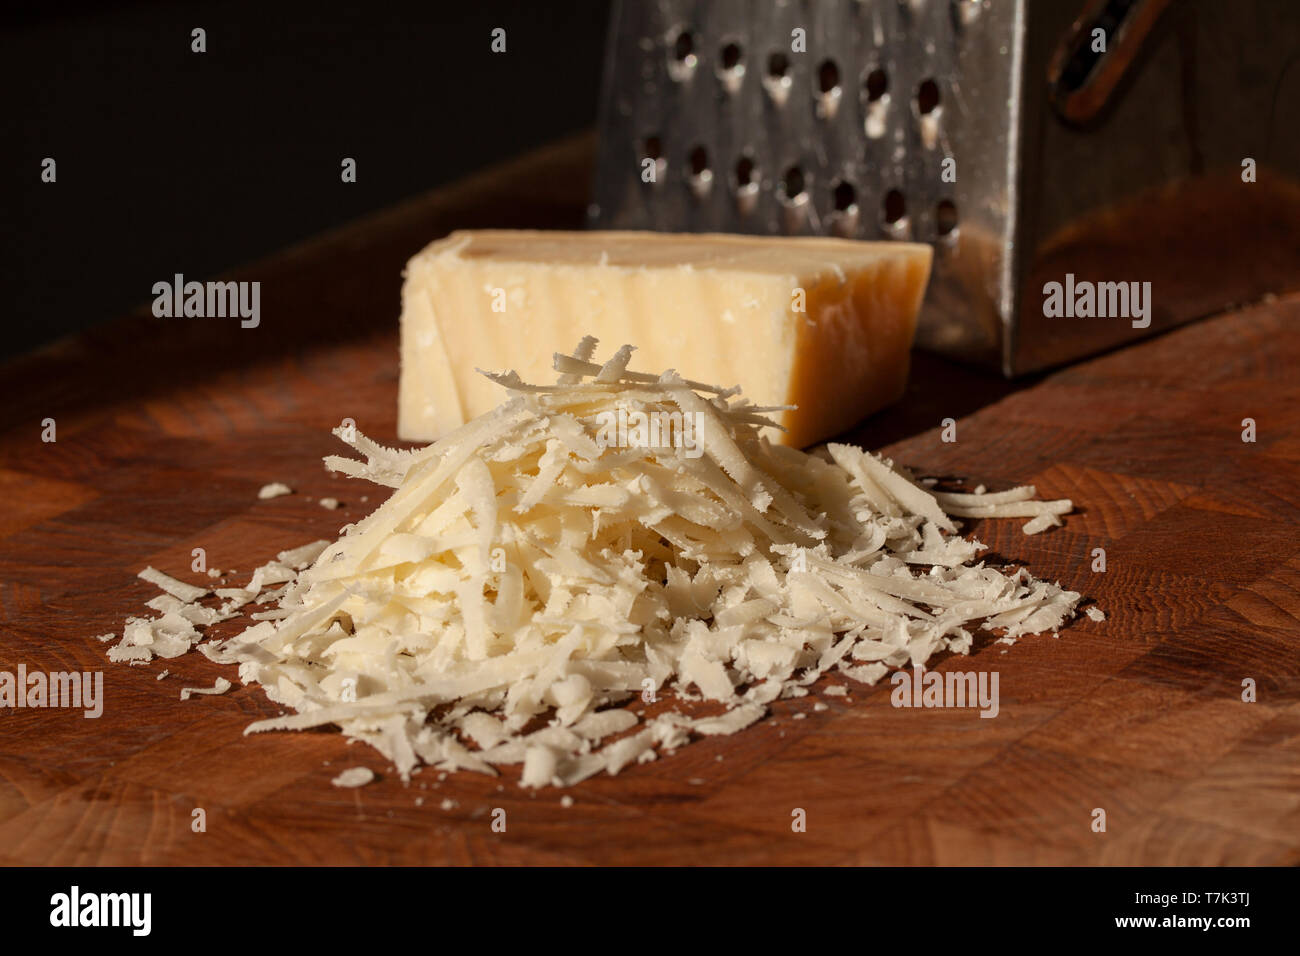 https://c8.alamy.com/comp/T7K3TJ/grated-italian-parmesan-cheese-on-wooden-chopping-board-with-a-block-of-parmasan-and-a-grater-in-the-background-close-up-photo-with-selective-focus-T7K3TJ.jpg